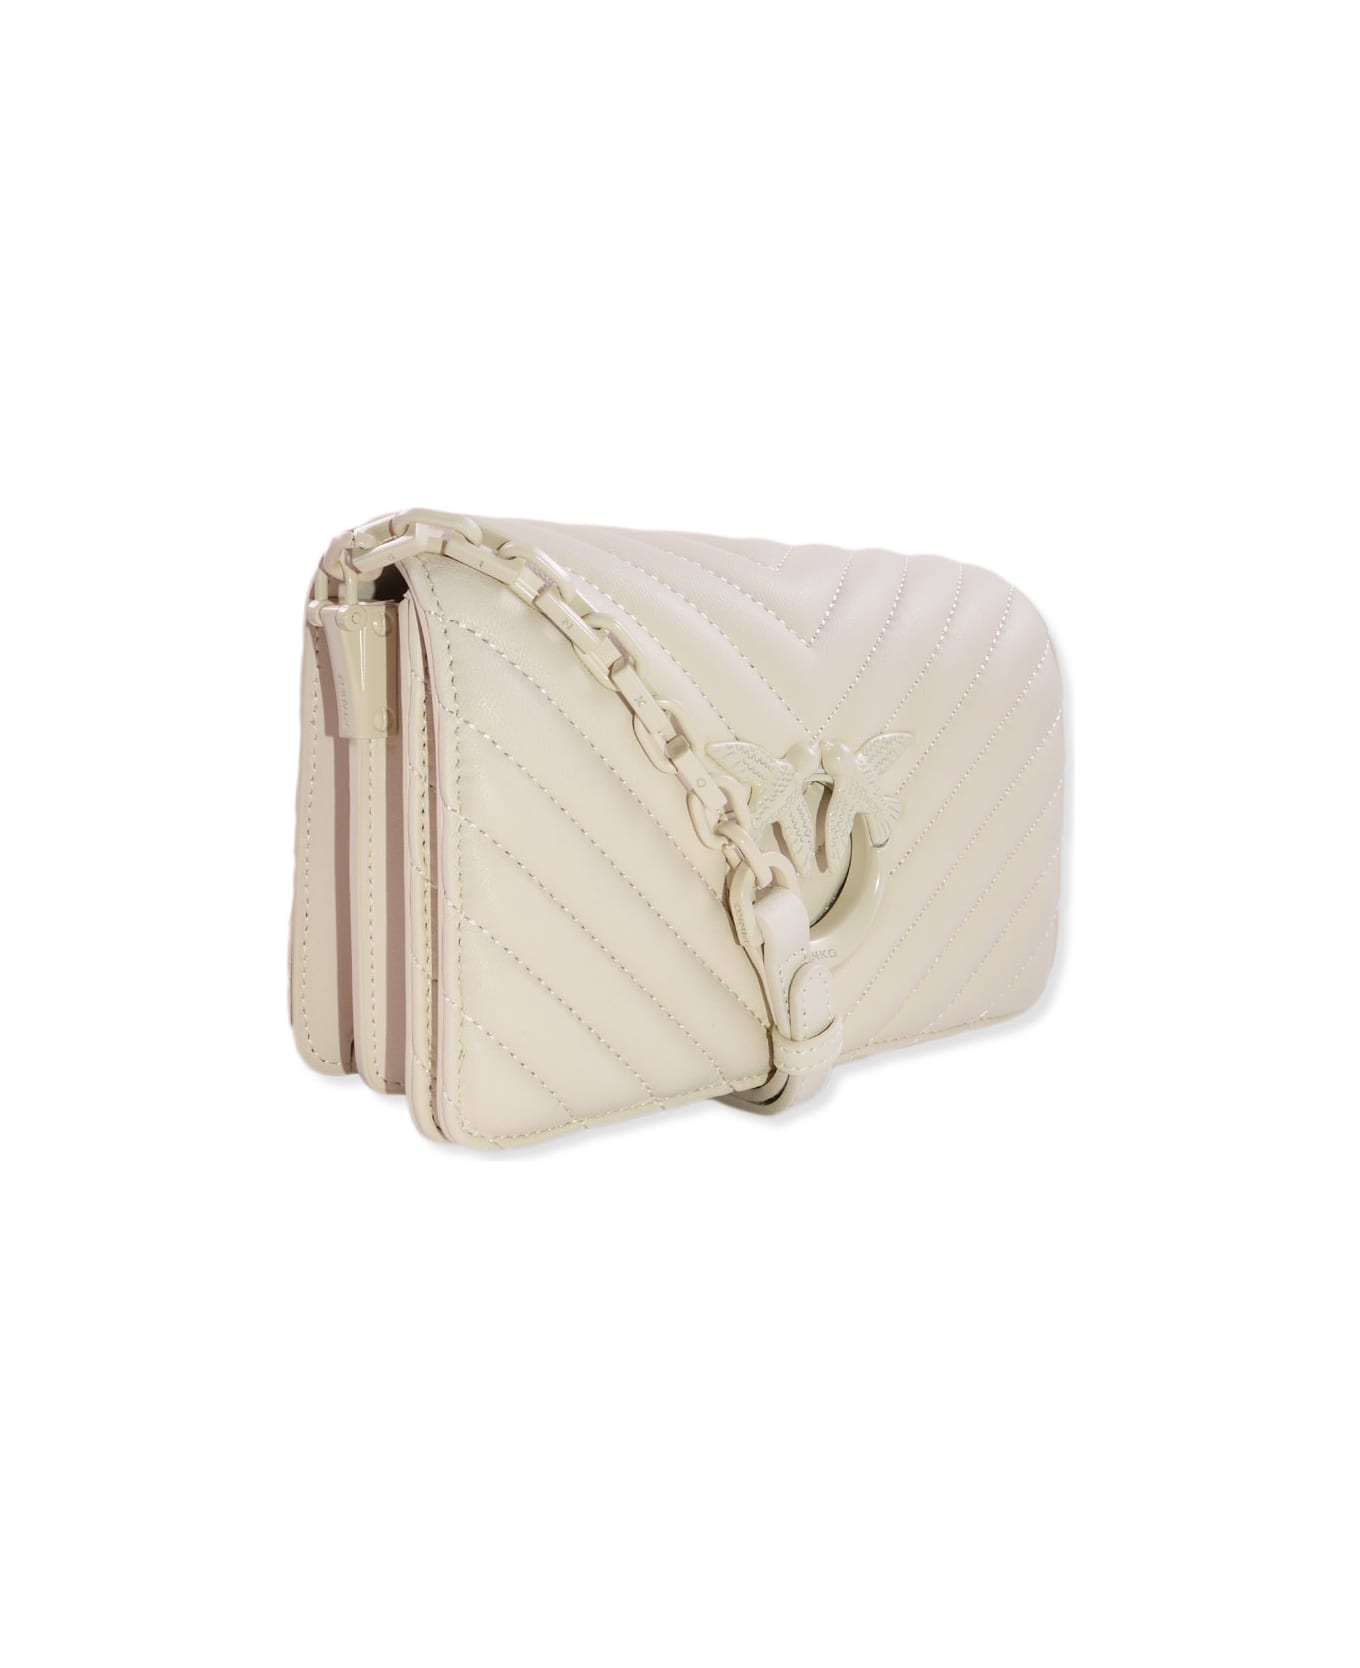 Pinko Logo-plaque Quilted Crossbody Bag - White